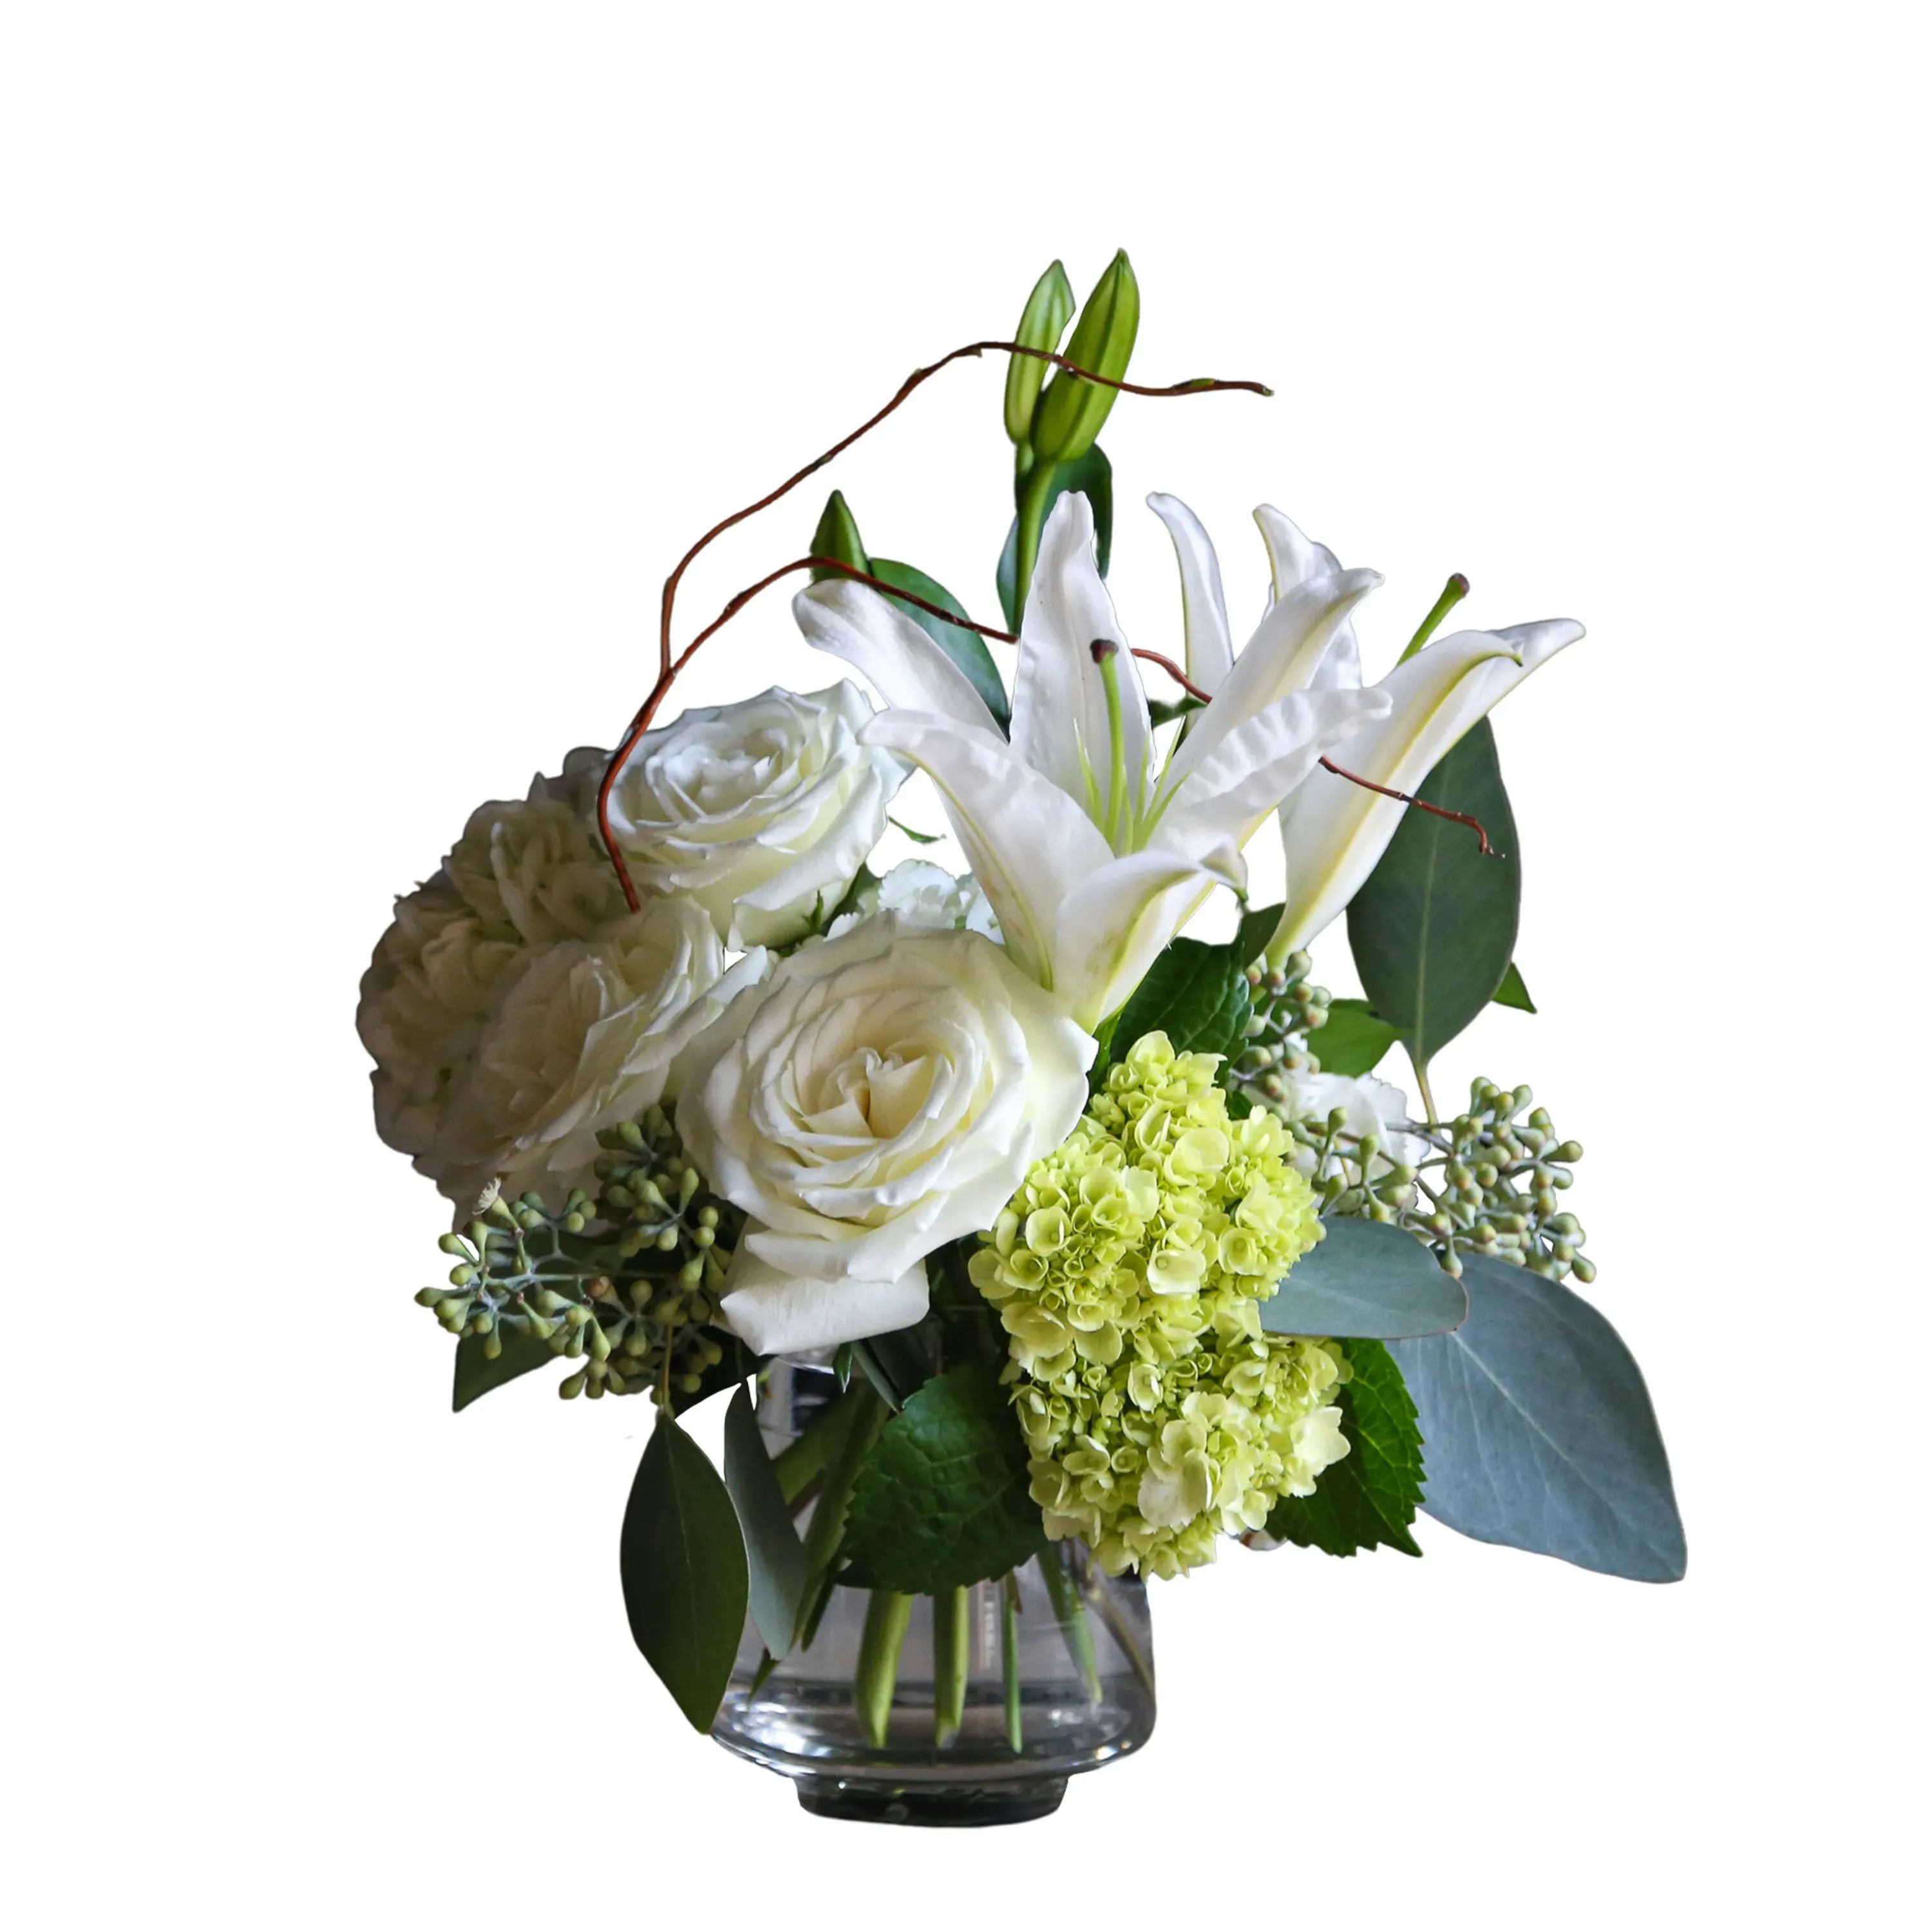 Festival  - TMF-1722 - Light and lovely.  Festival celebrates new beginnings.  Flowers like lilies and roses make a statement in this stylish arrangement. Standard 13&quot; tall x 13&quot; wide